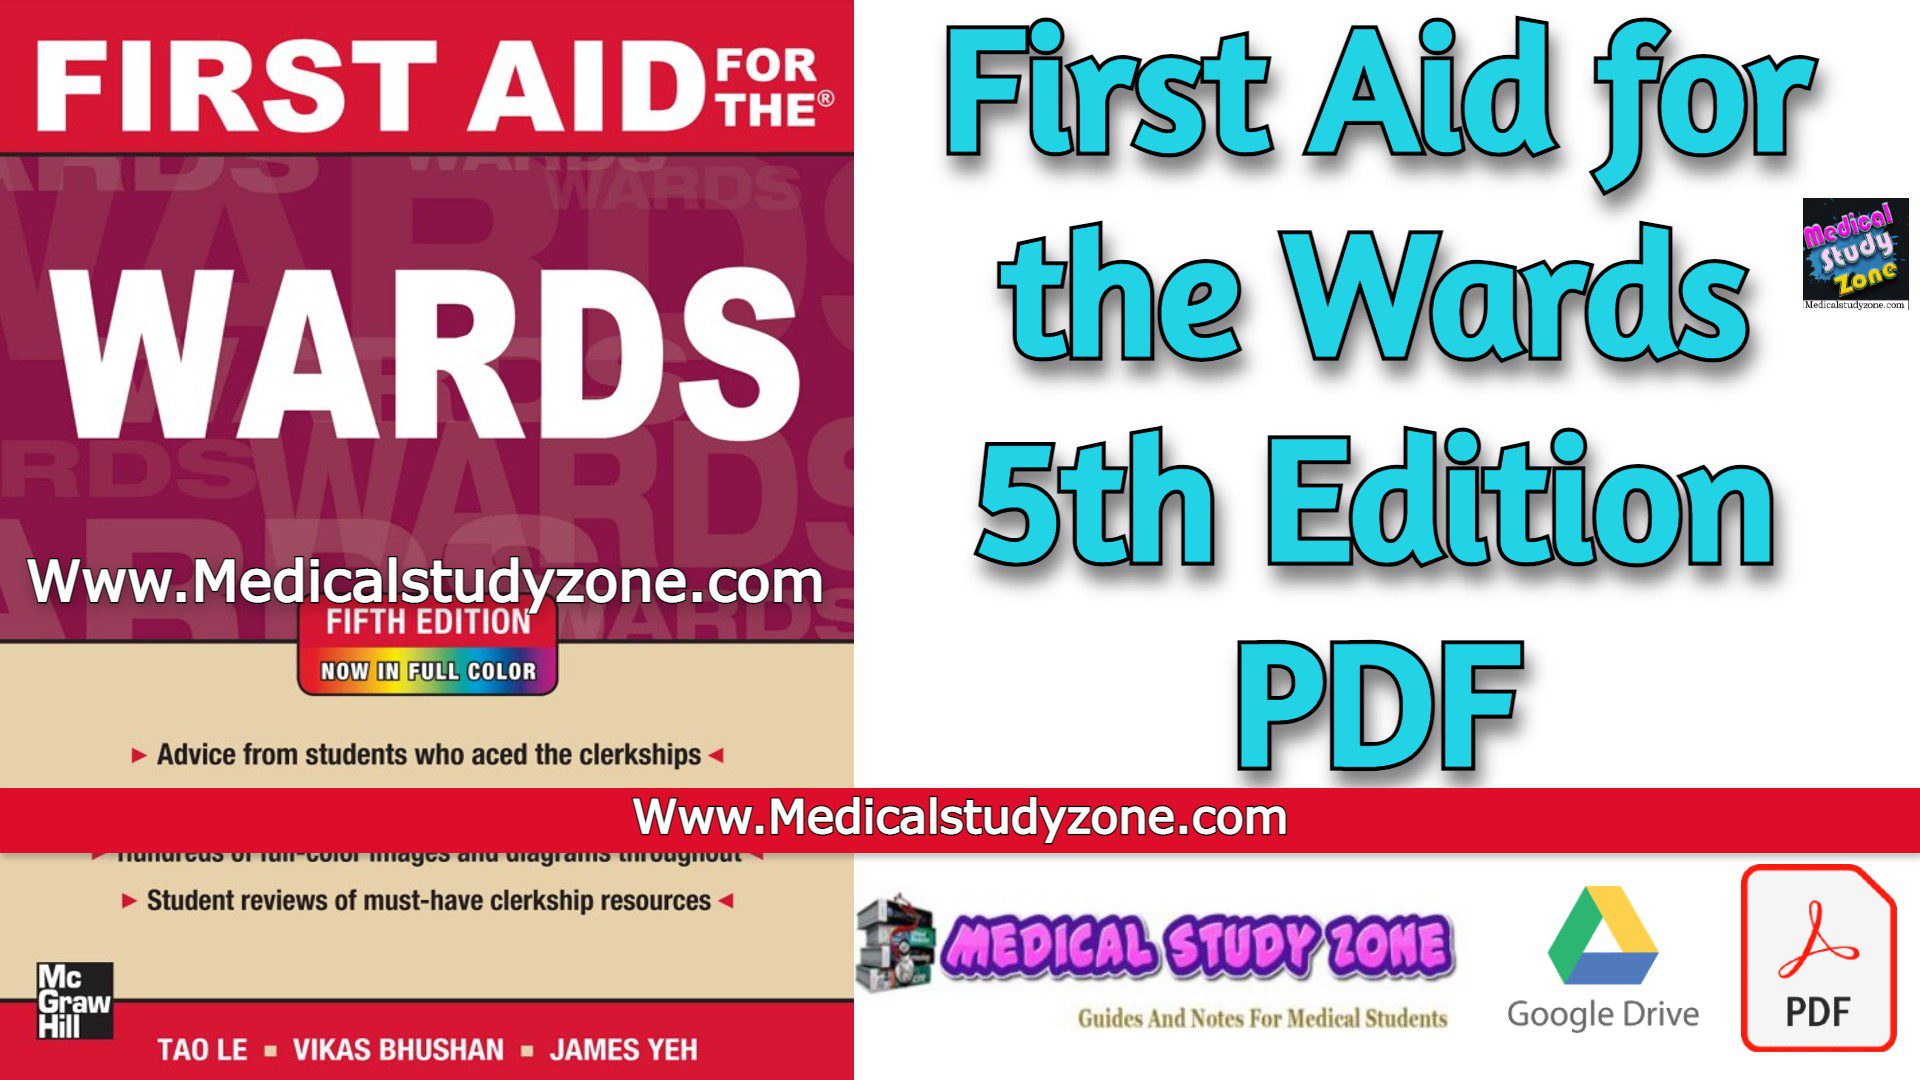 First Aid for the Wards 5th Edition PDF Free Download [Direct Link]